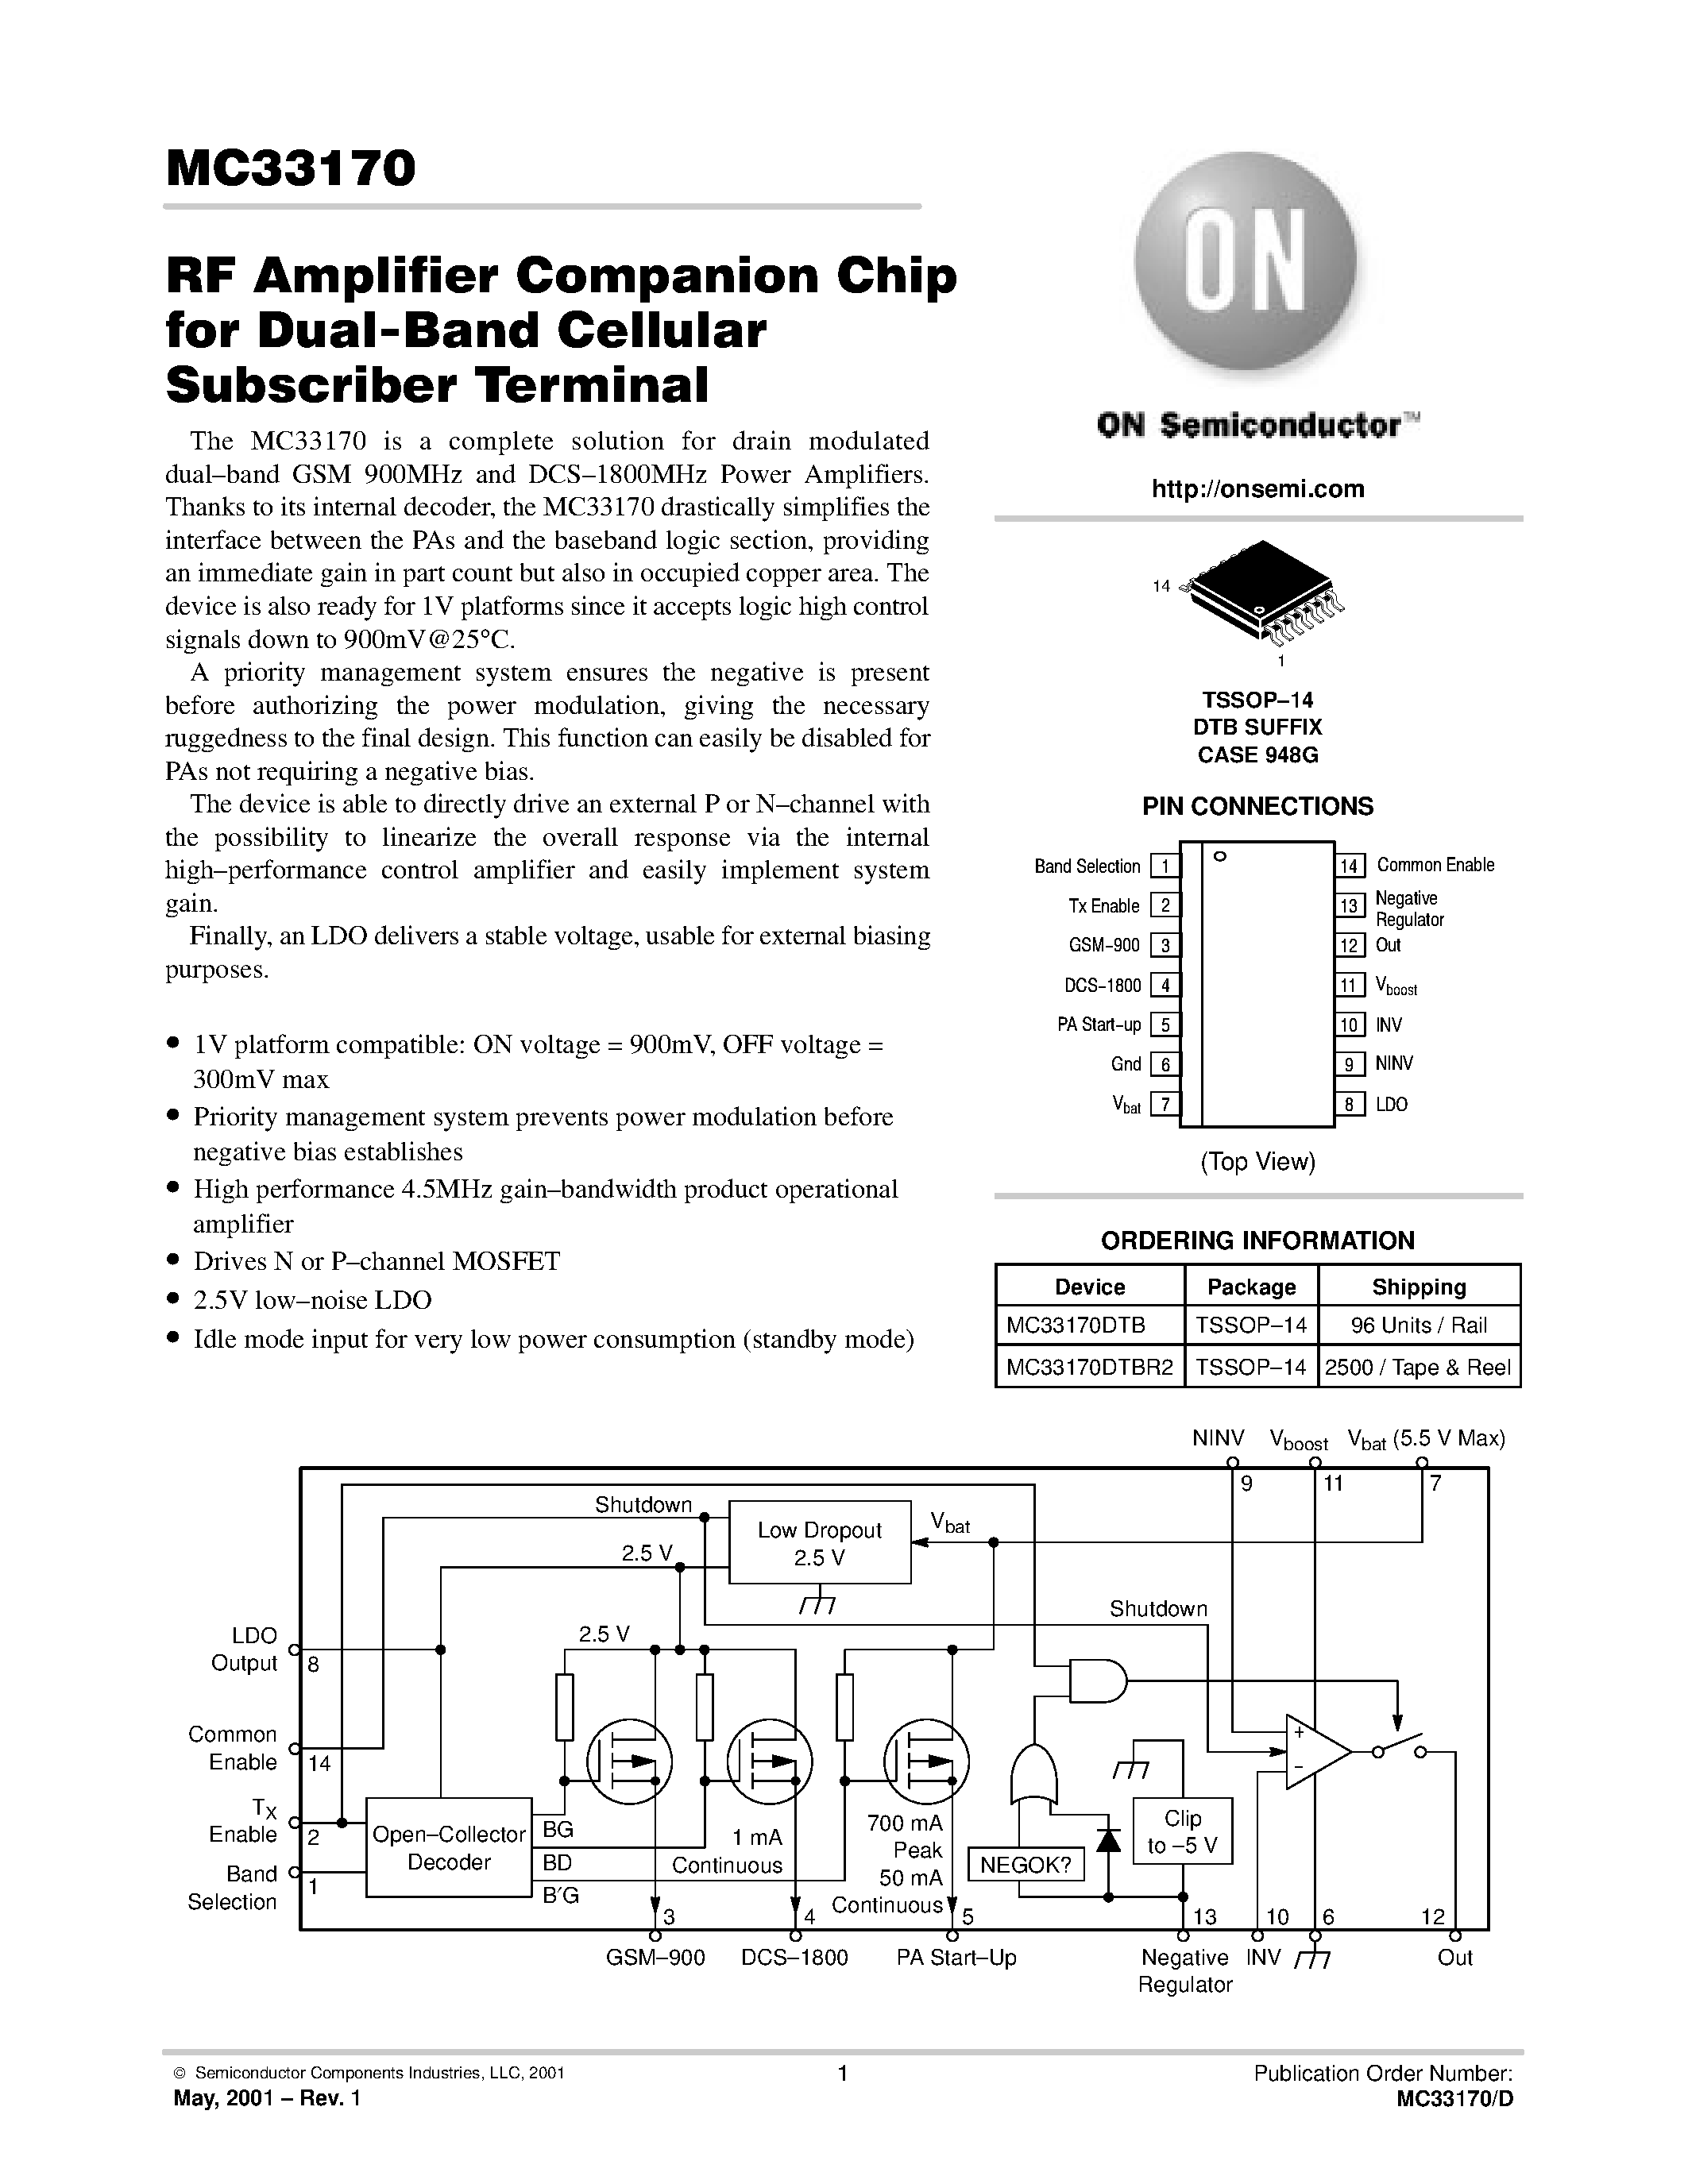 Даташит MC33170 - RF Amplifier Companion Chip for Dual-Band Cellular Subscriber Terminal страница 1